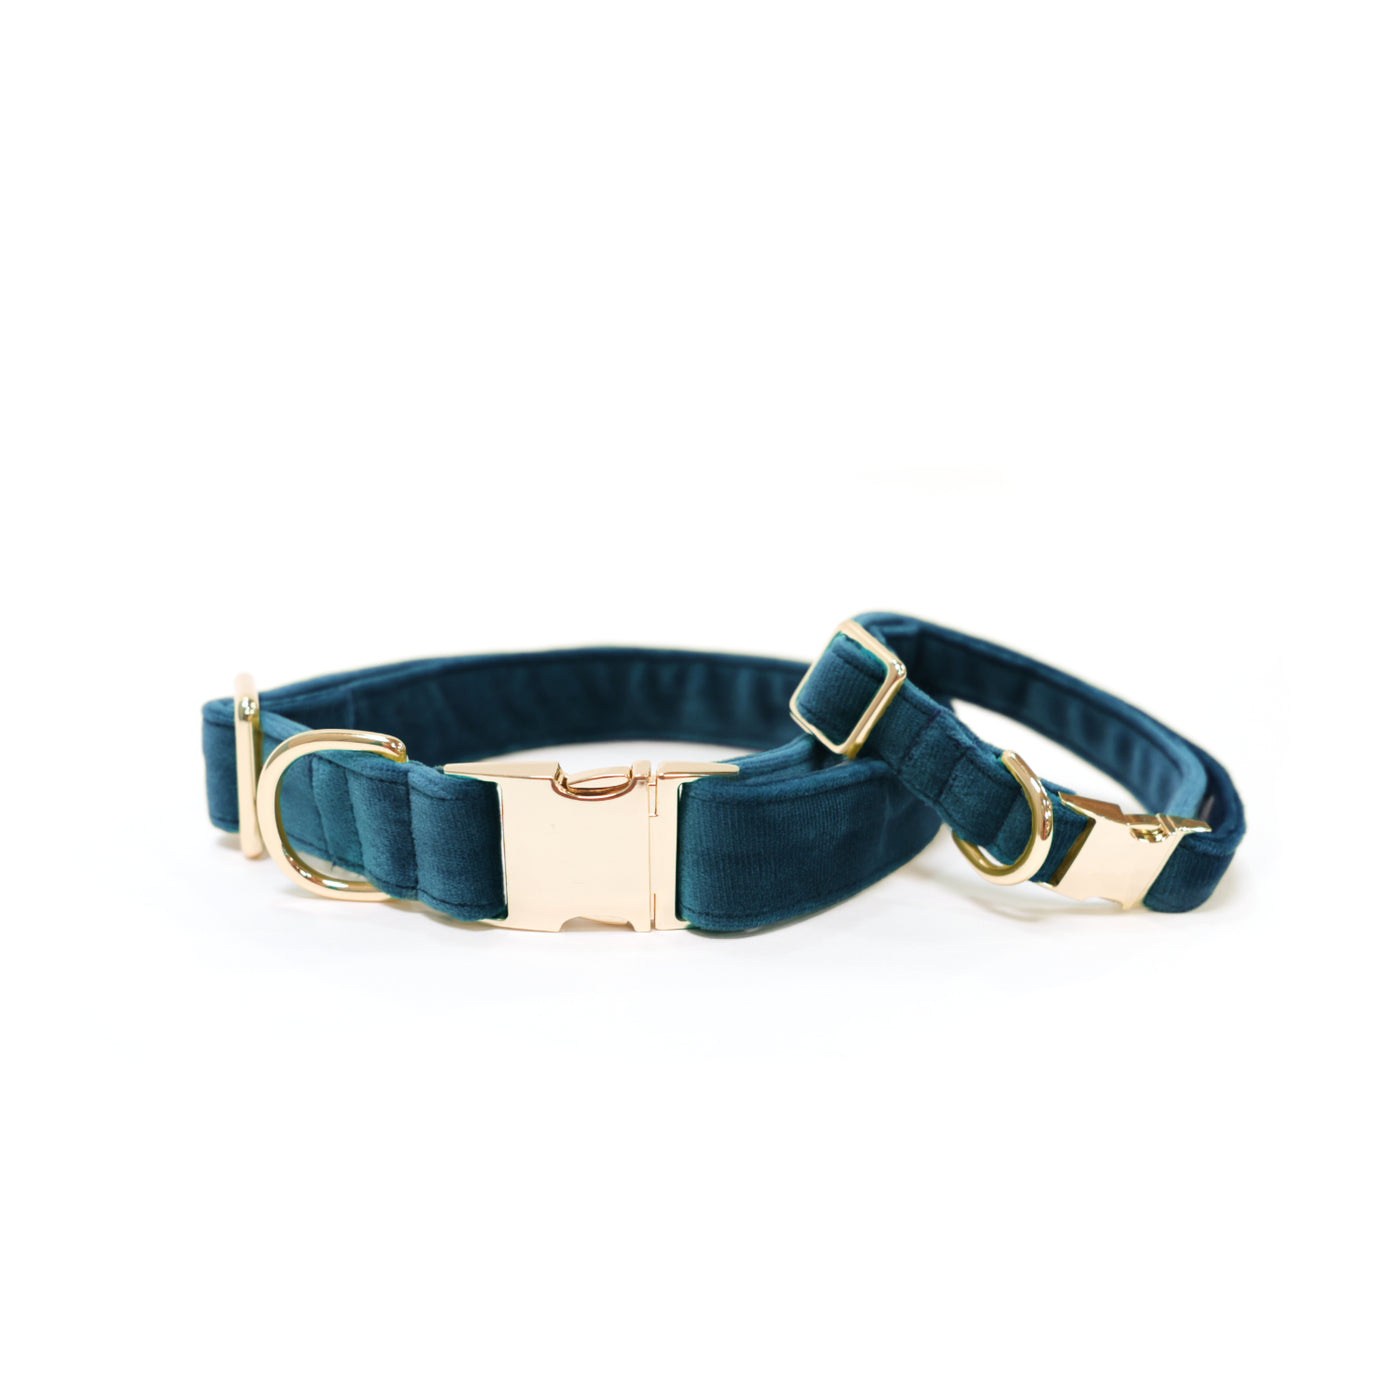 Dark teal velvet dog collars in sizes small and medium, both with gold hardware